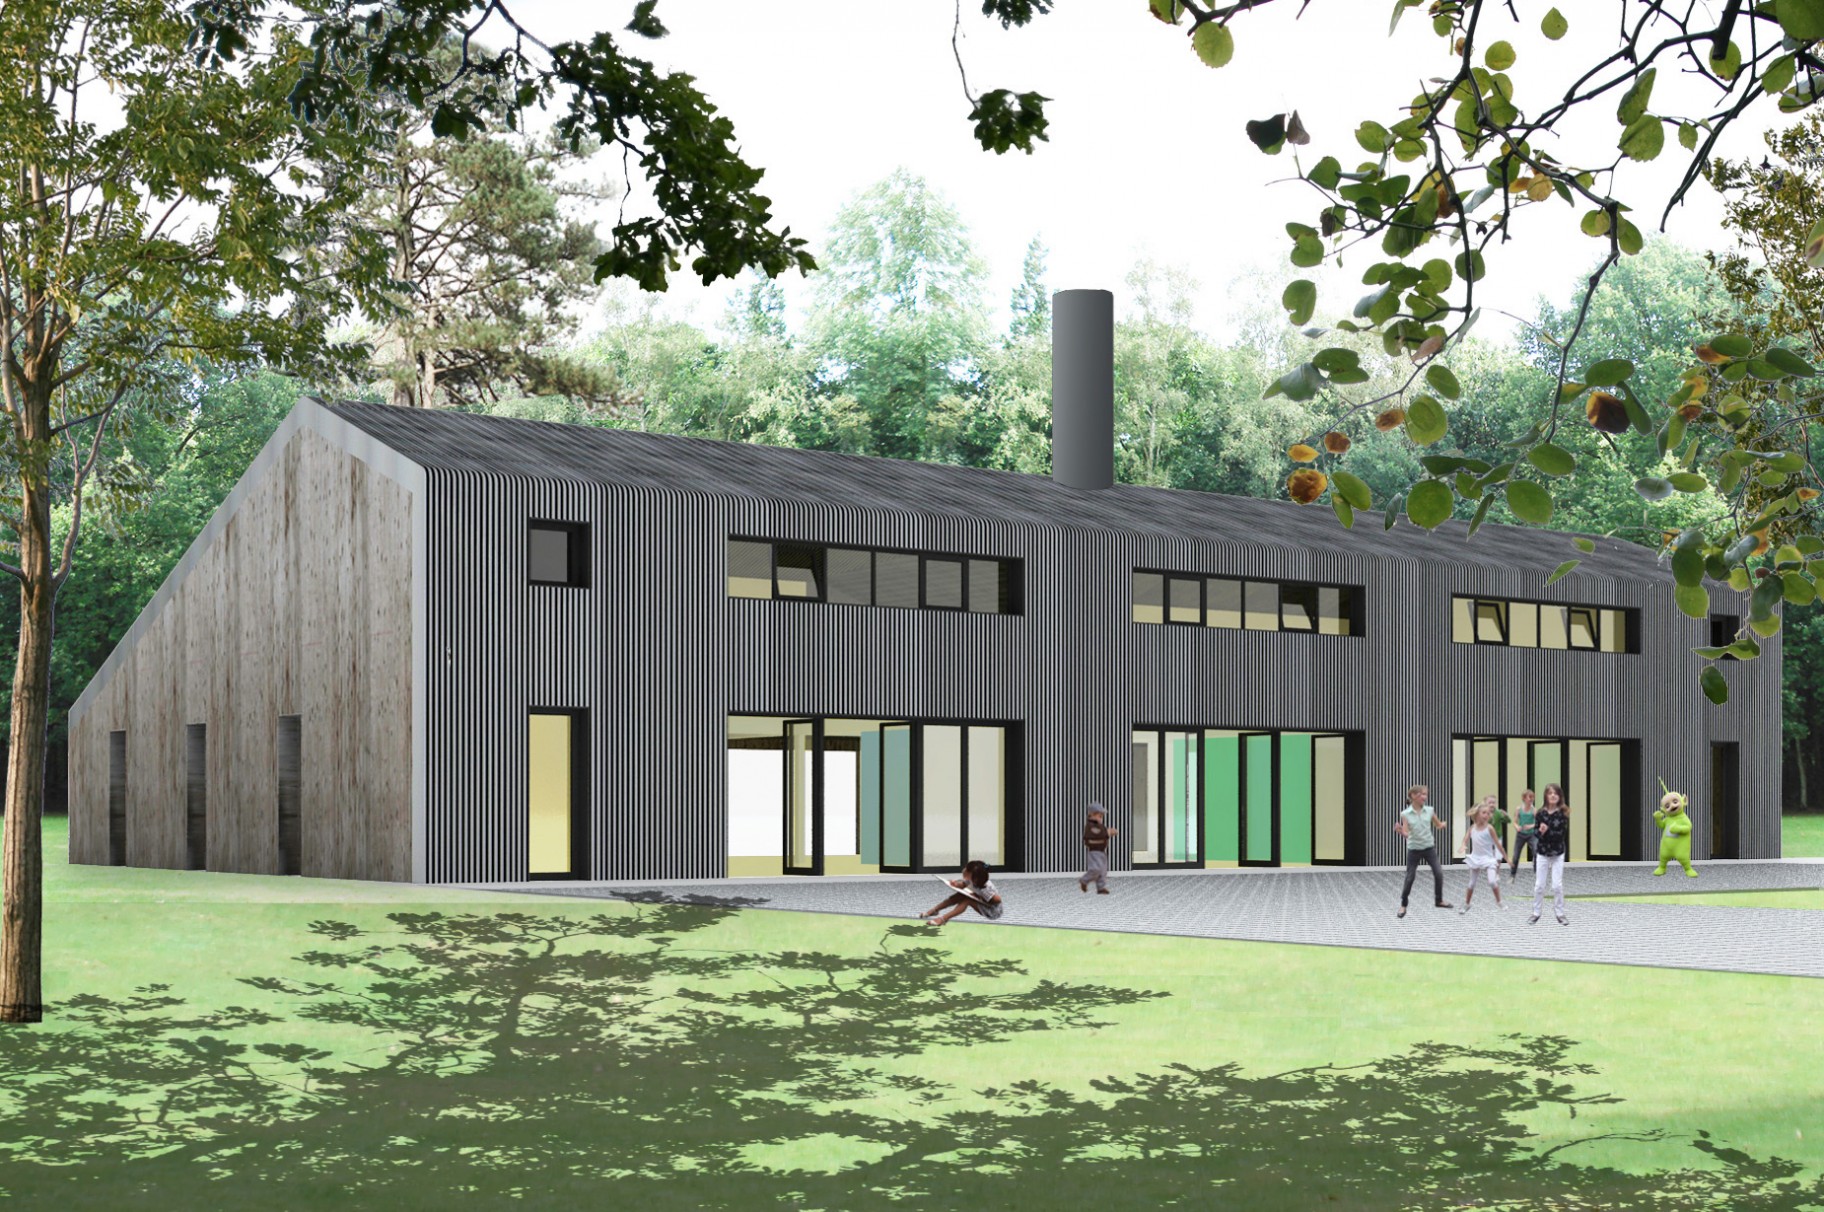 Competition Passiefkleuterschool Kalmthout submitted